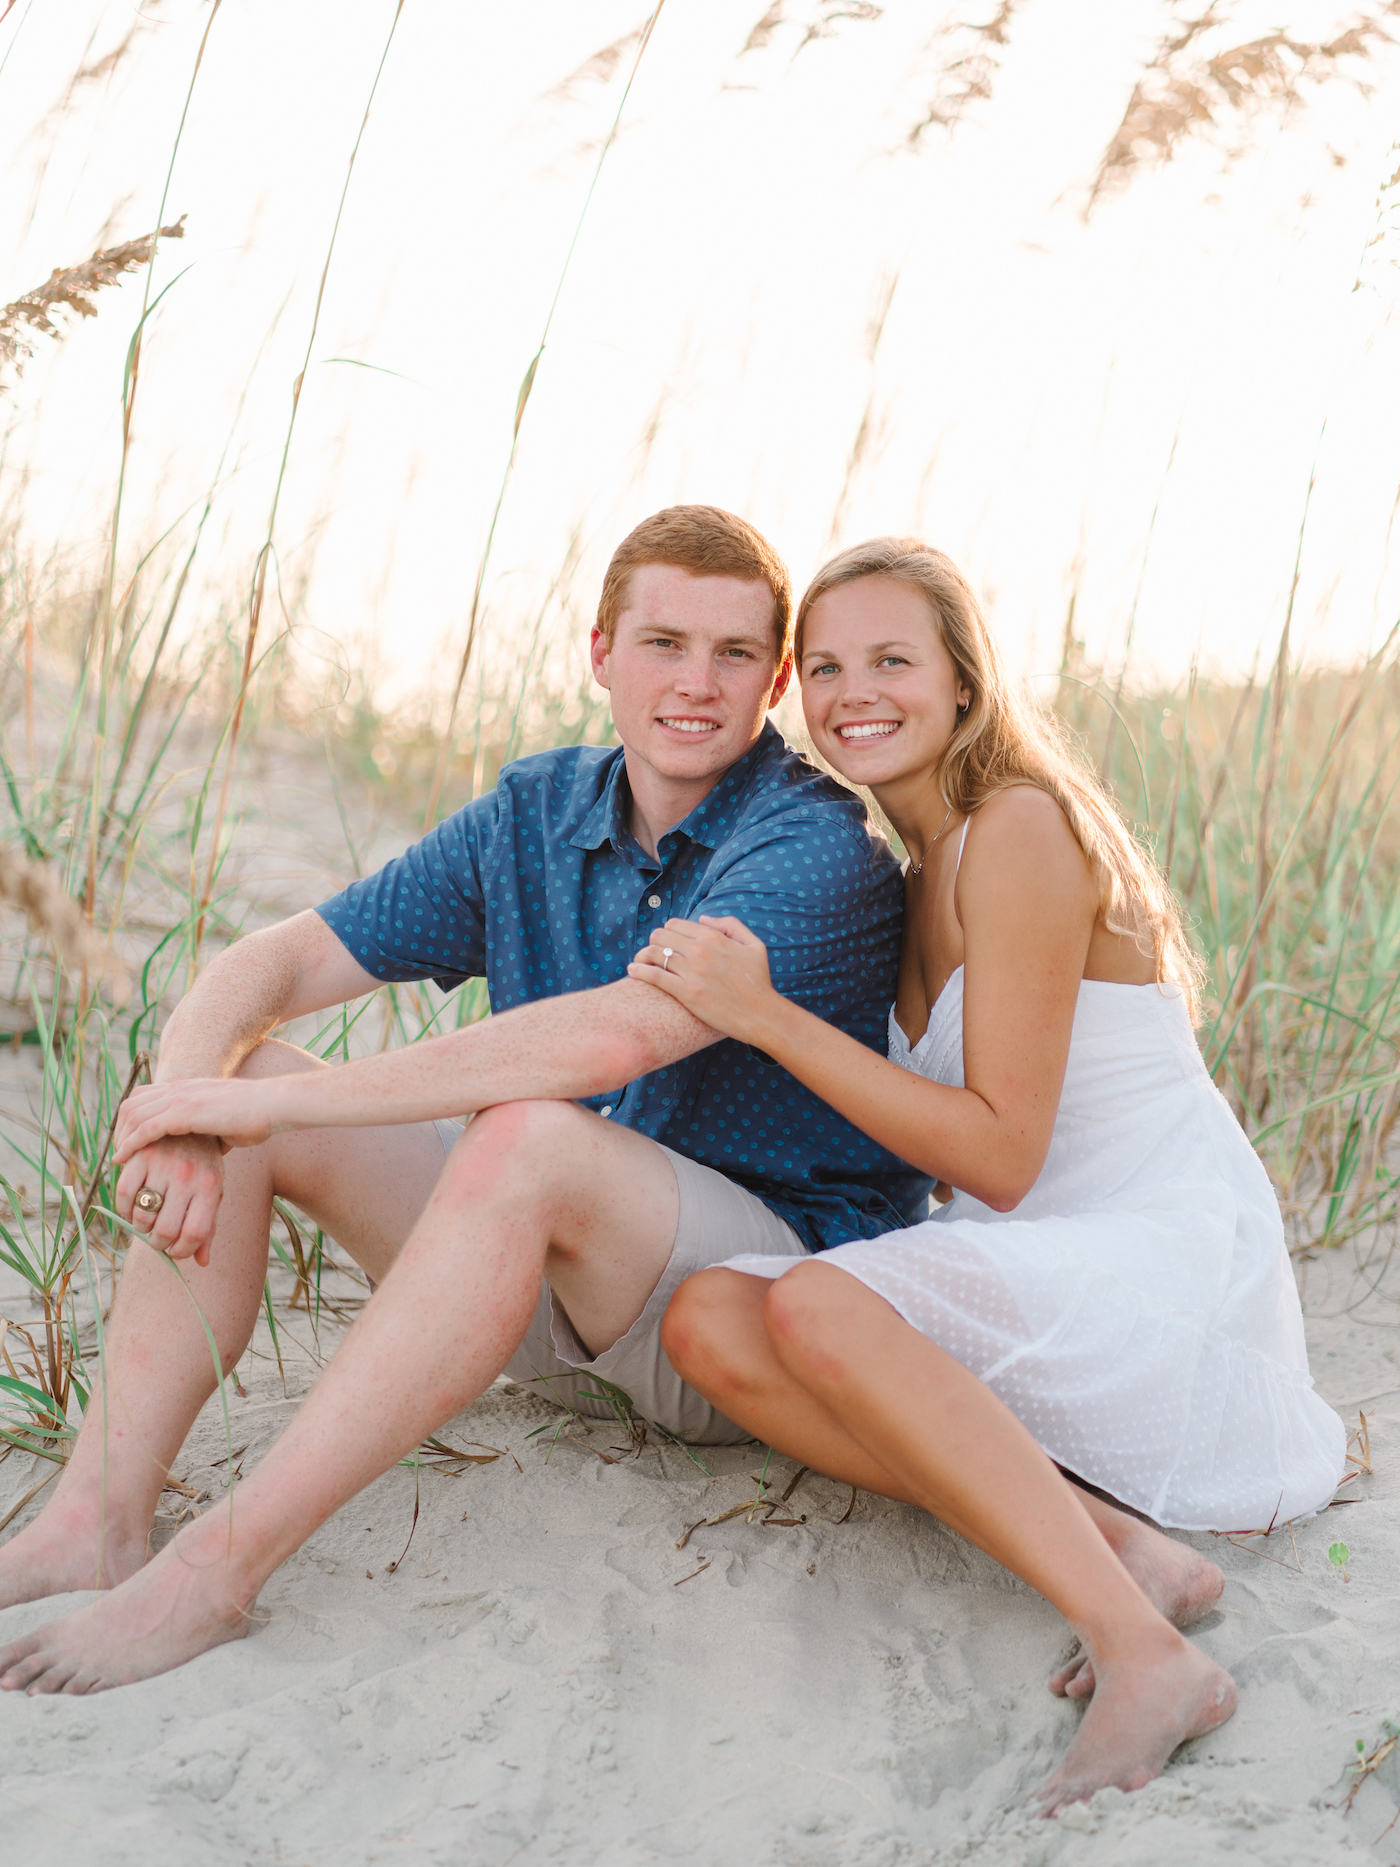 Pawleys Island Engagement Session - Top Engagement Photography in Pawleys Island